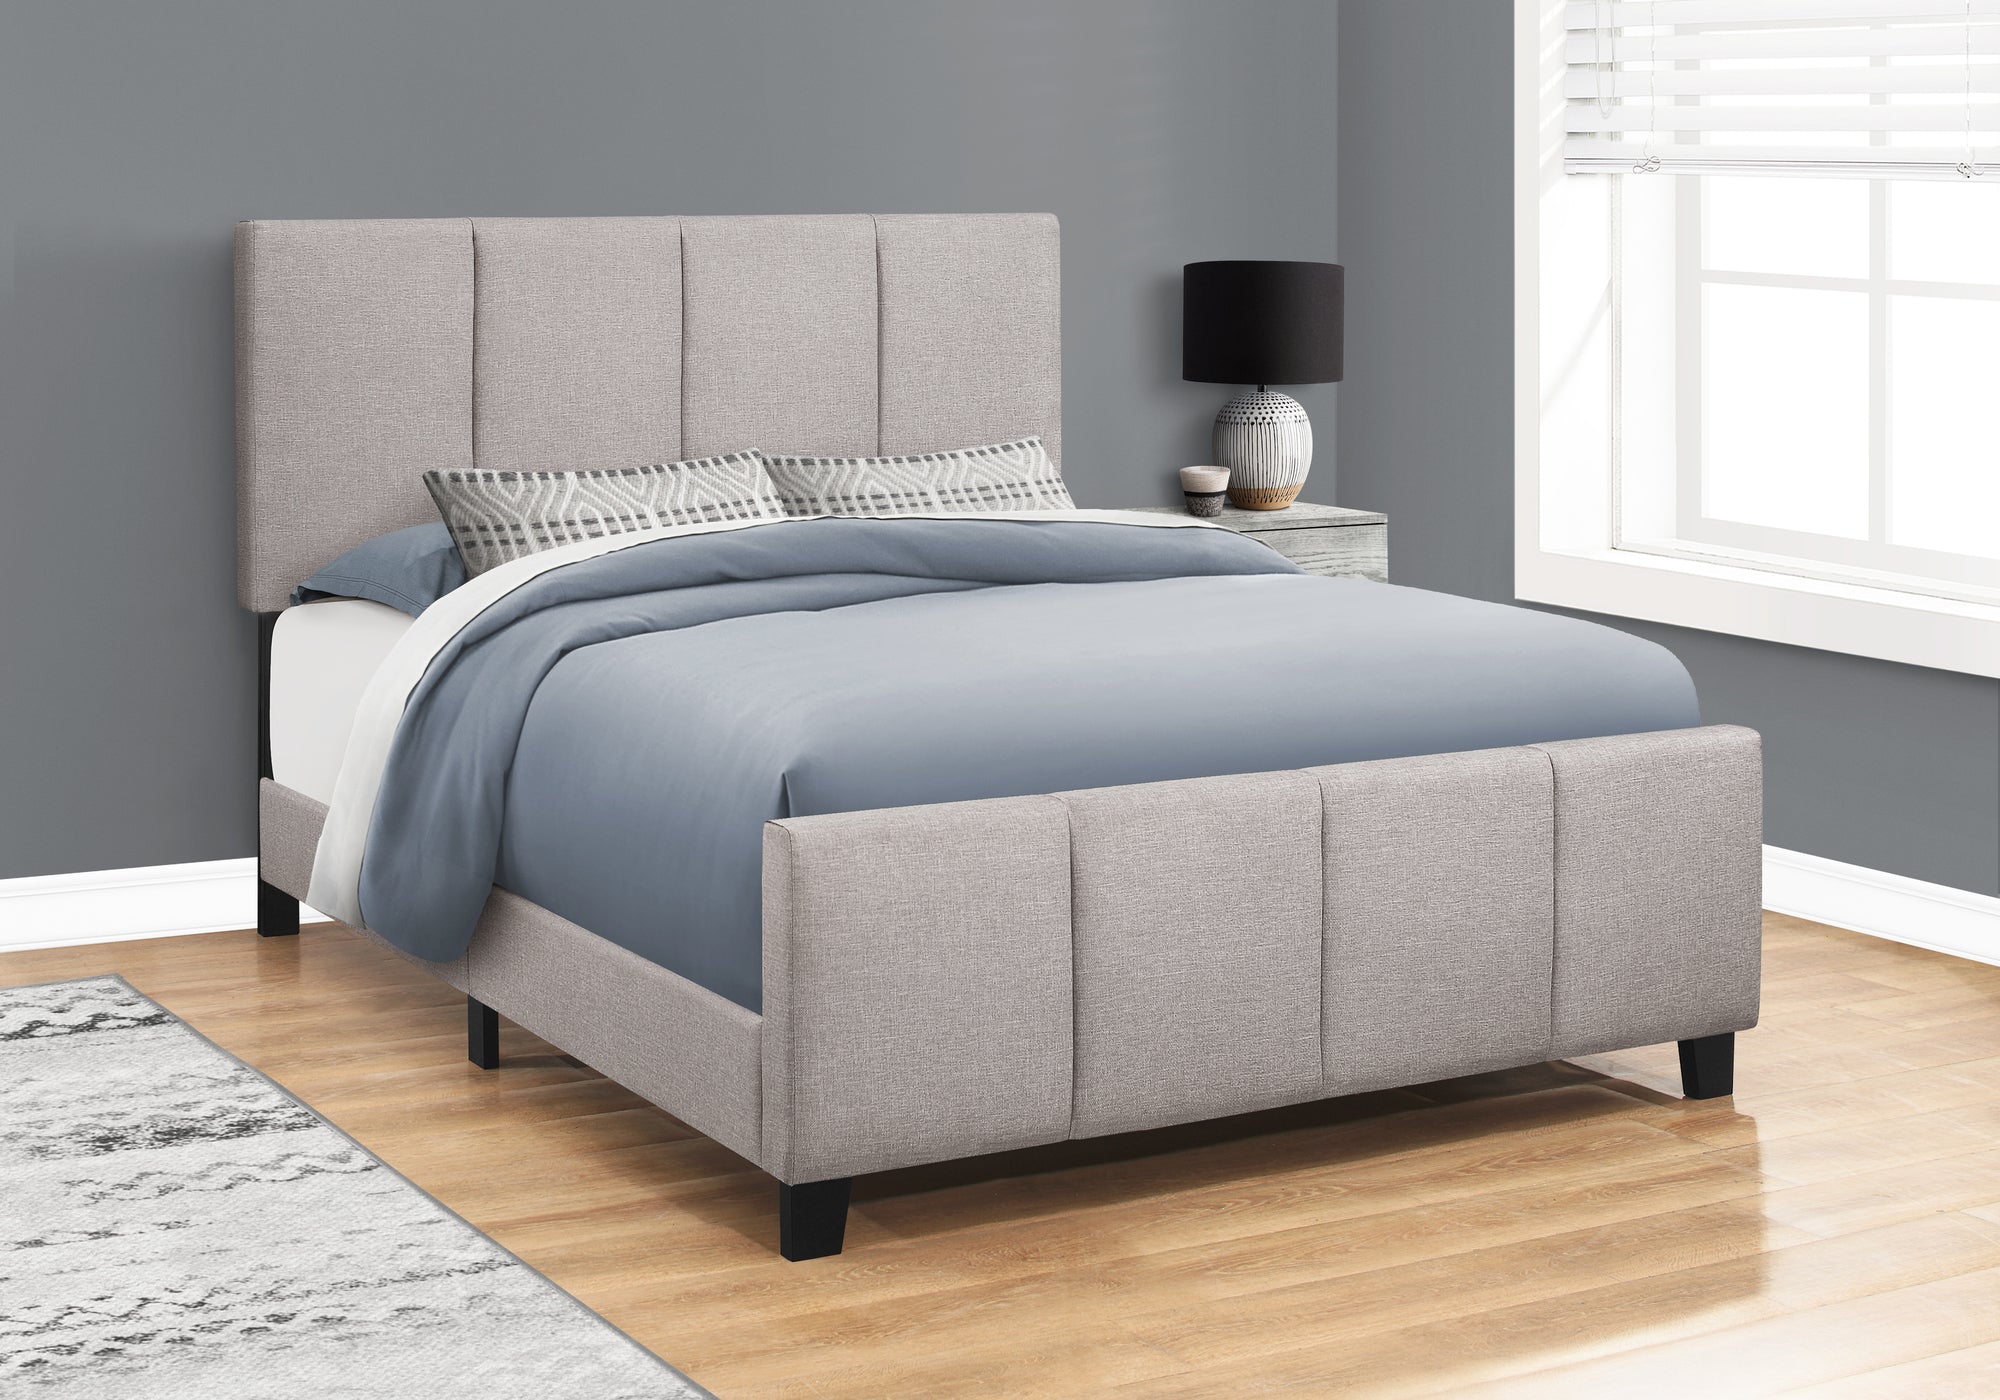 bed queen size grey linen with black wood legs i6025q